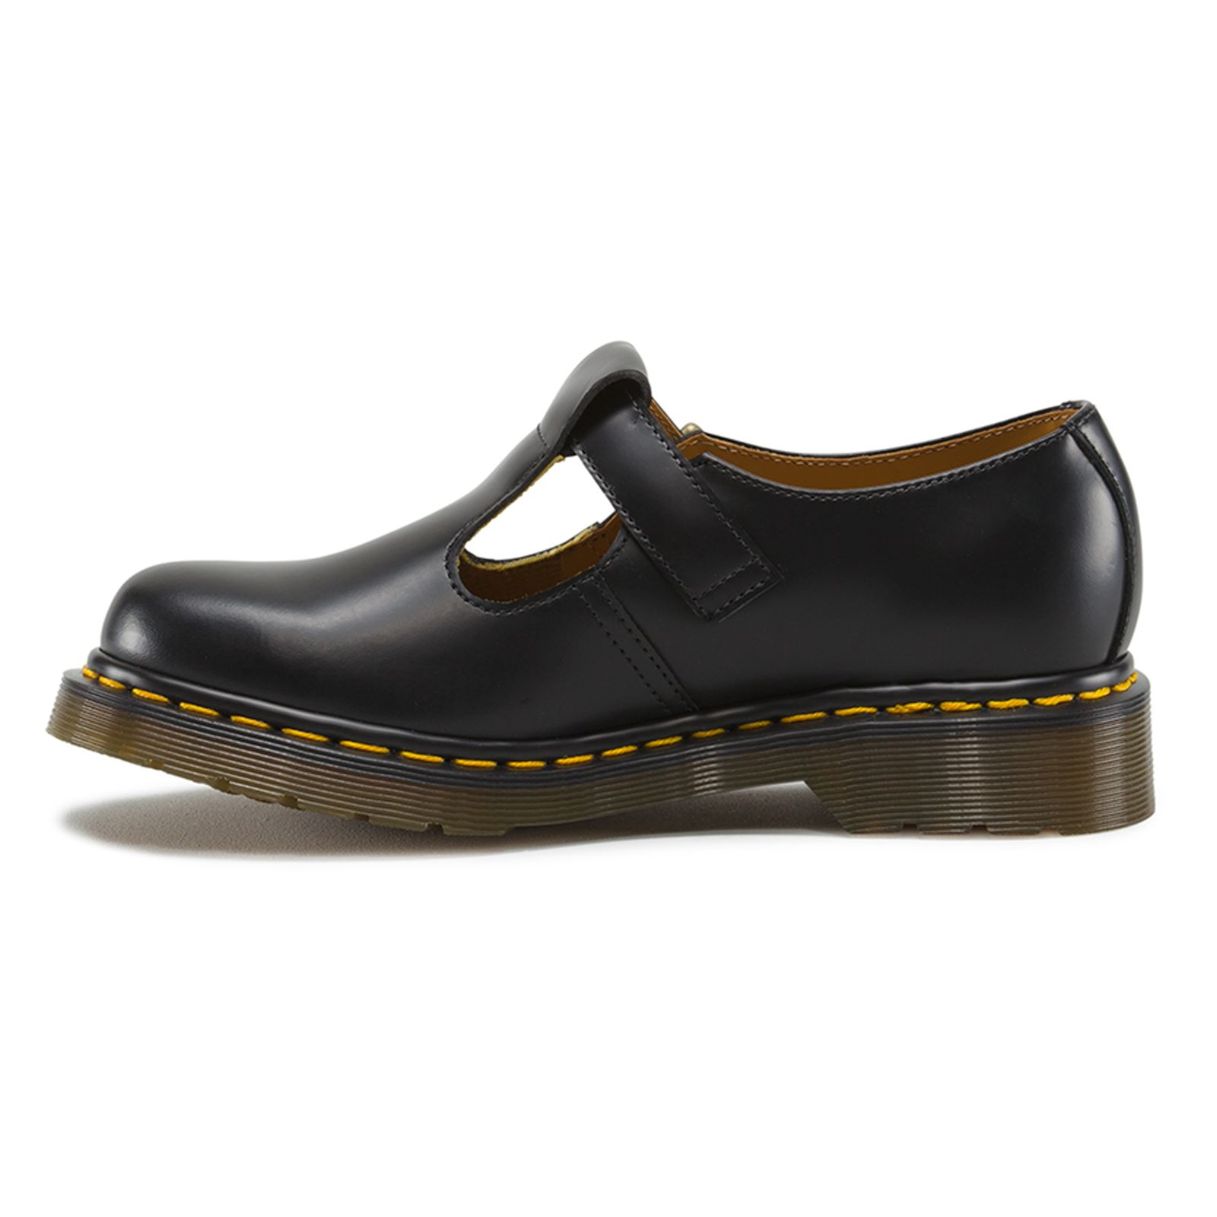 Dr. Martens Polley Smooth Smooth Leather Women's Mary Jane Shoes